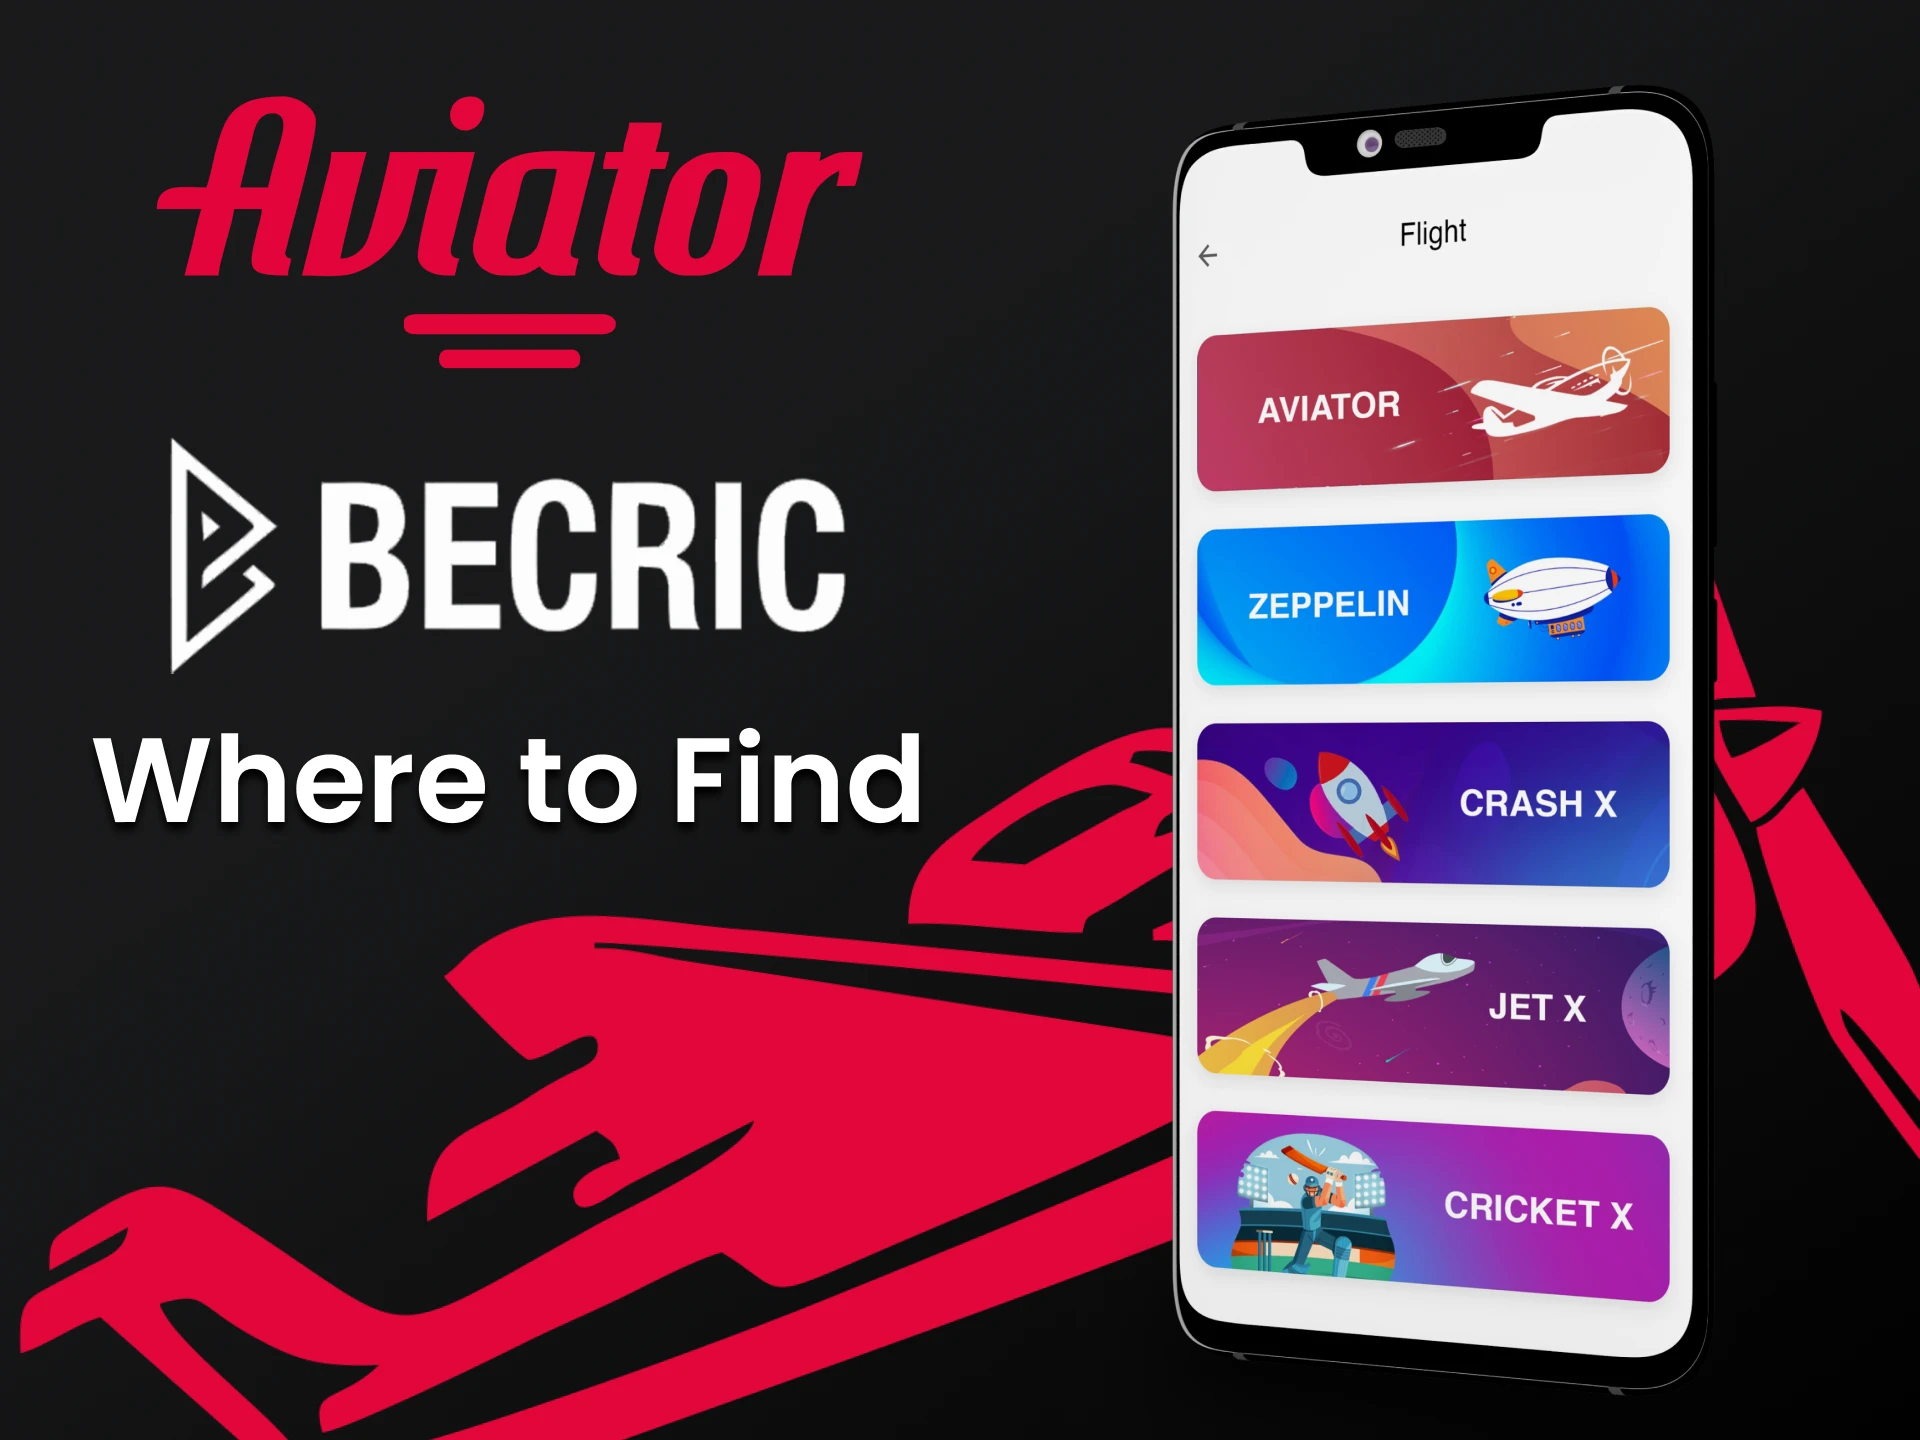 Finding the game Aviator in the Becric application will be difficult.